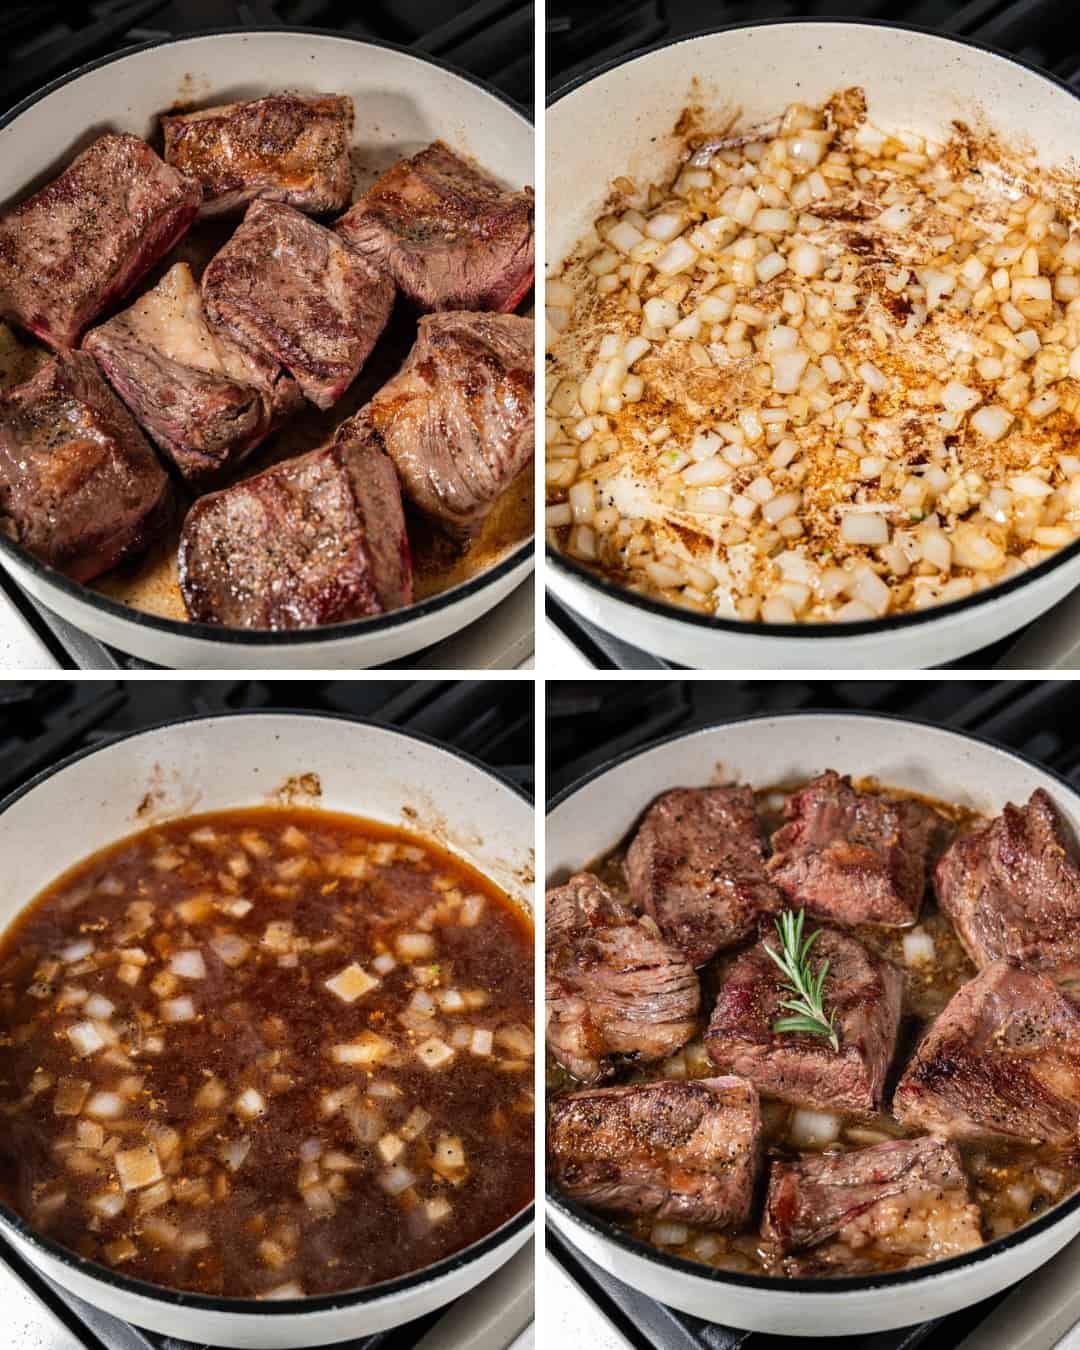 A collage of images showing some of the steps for making braised beef short ribs.